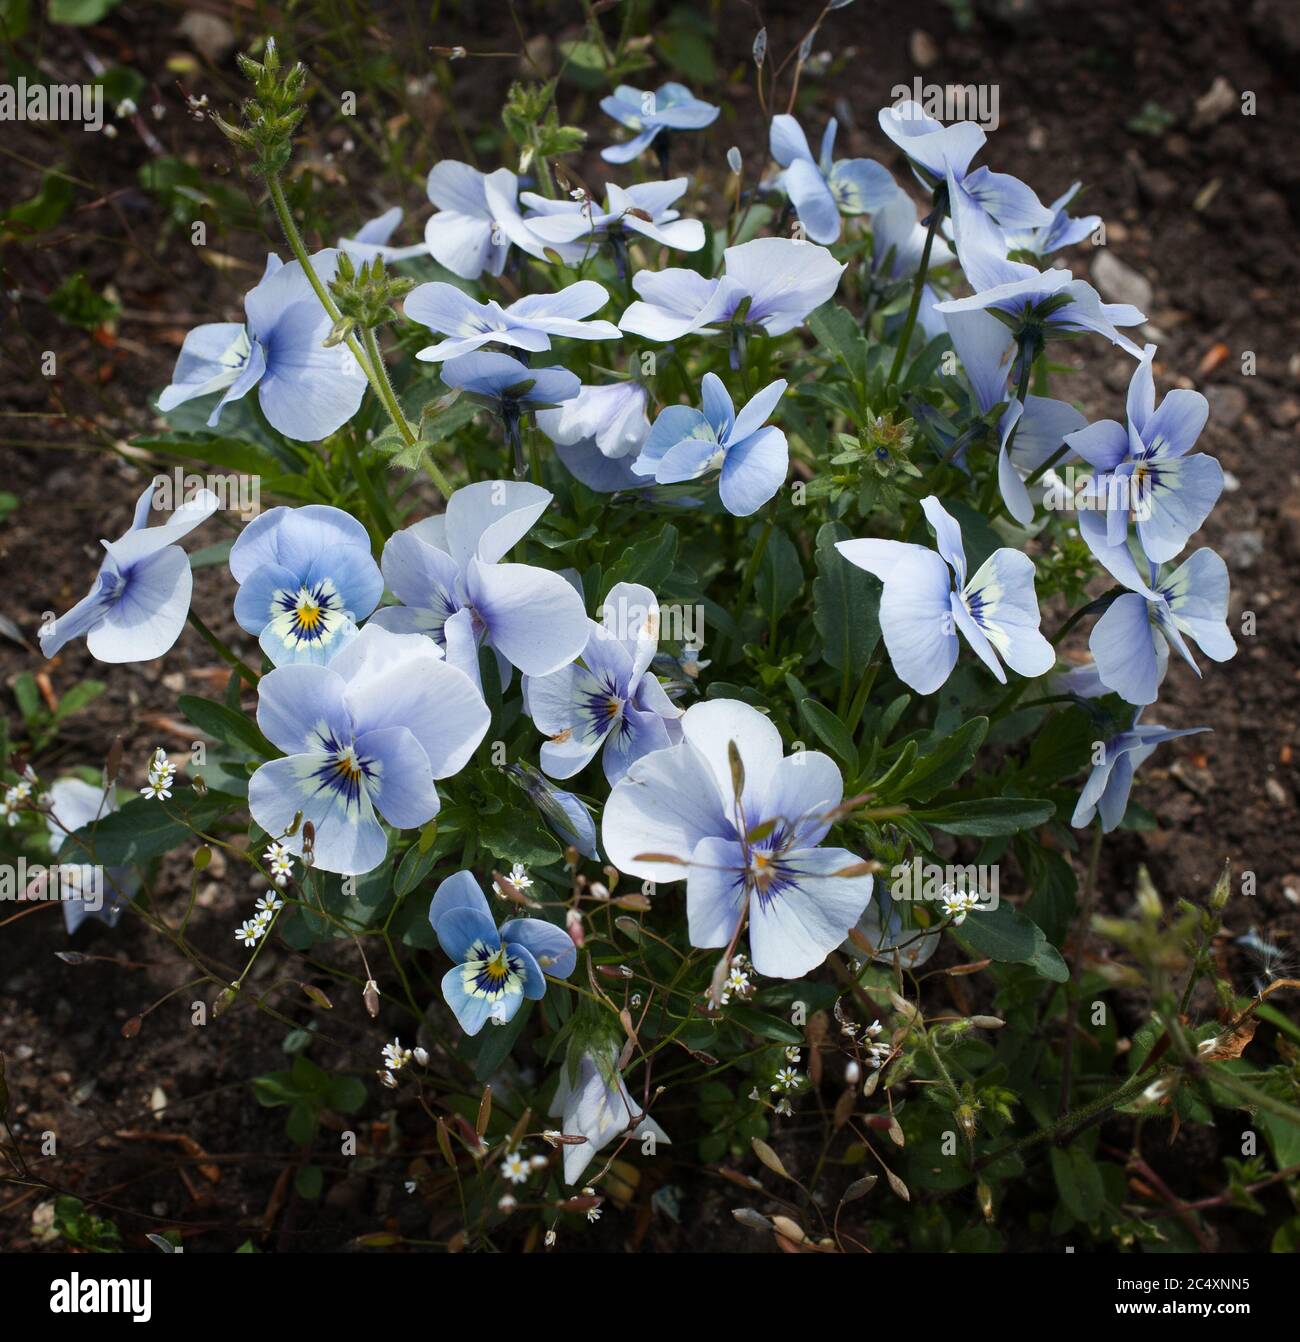 Small blue flowers called Johnny Jump Up flowers a species of Violets Botanical name Viola Tricolor Stock Photo